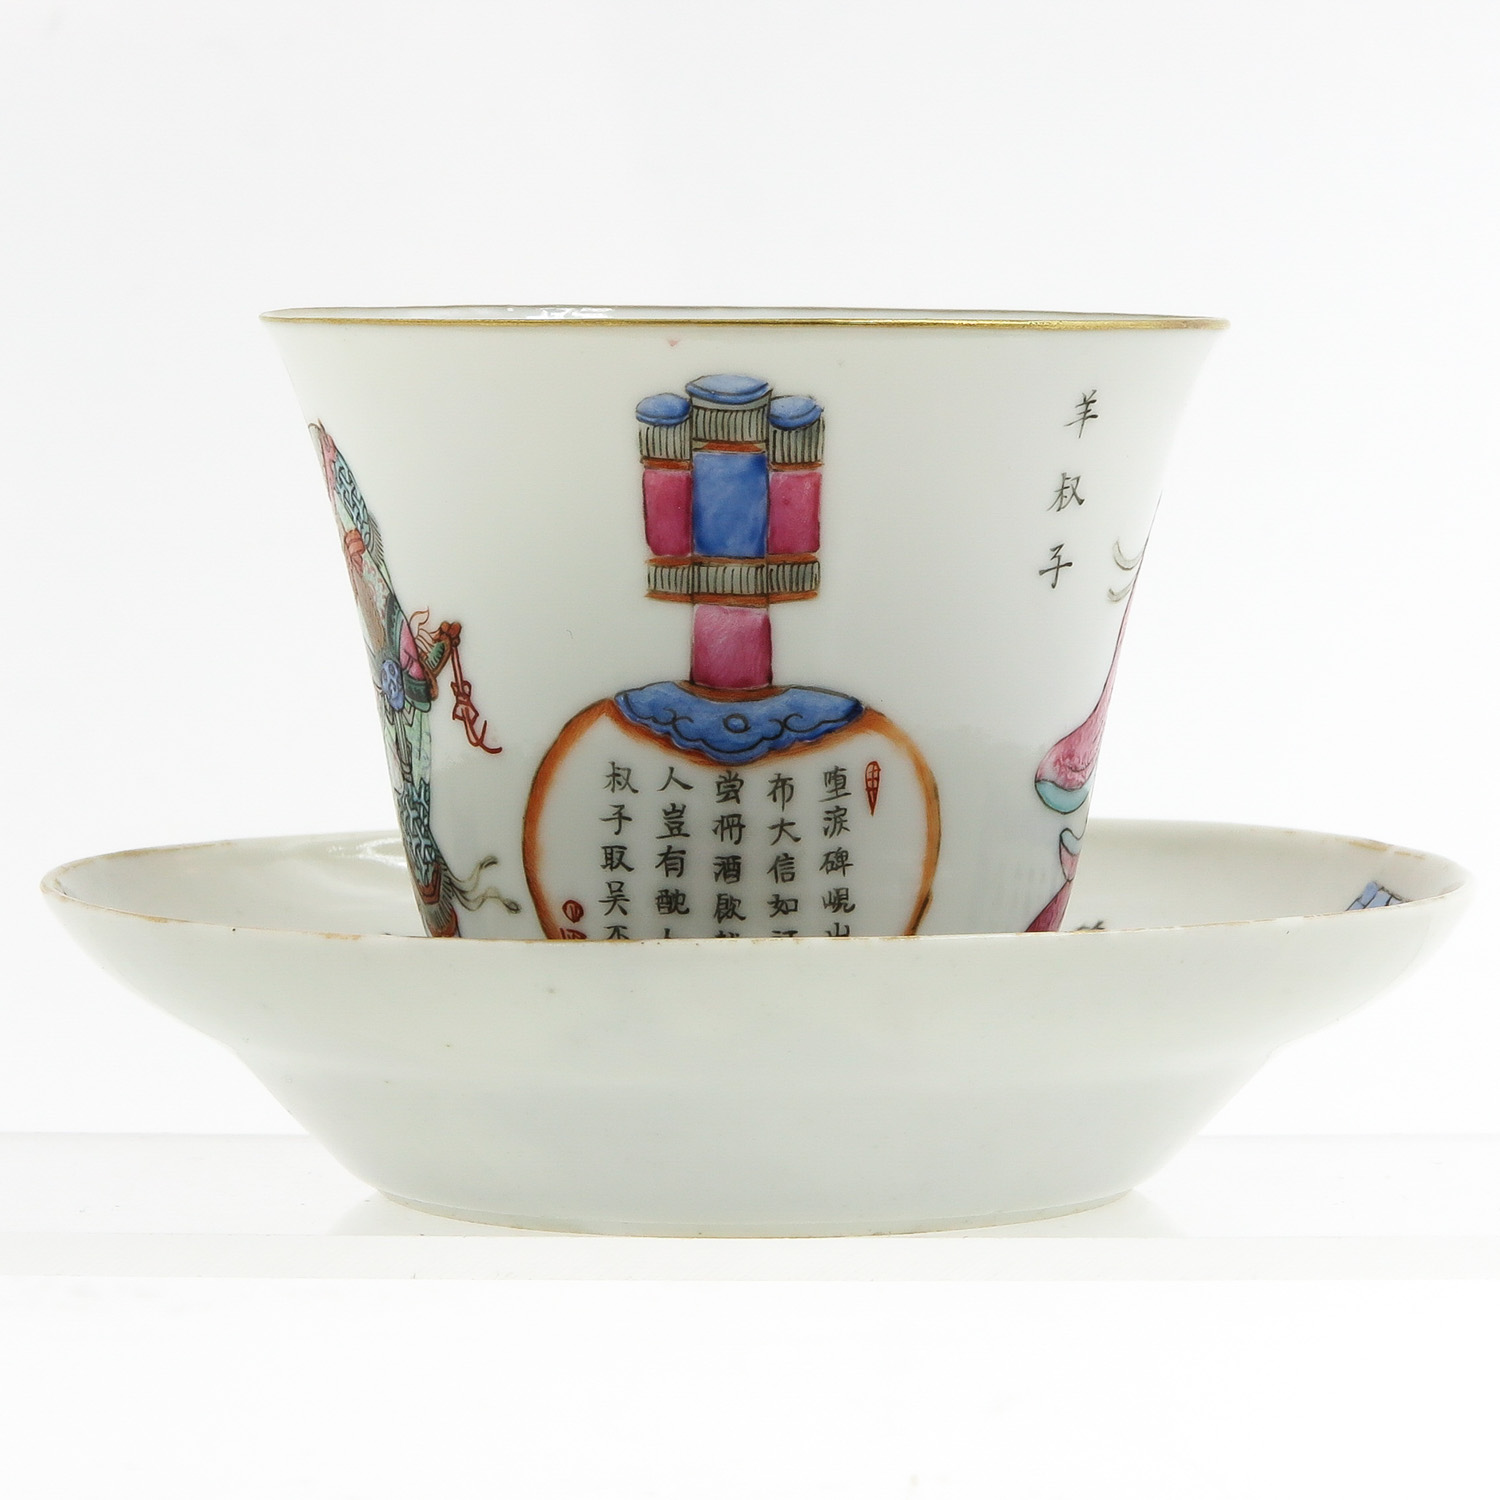 A Wu Shuang Pu Decor Cup and Saucer - Image 4 of 10